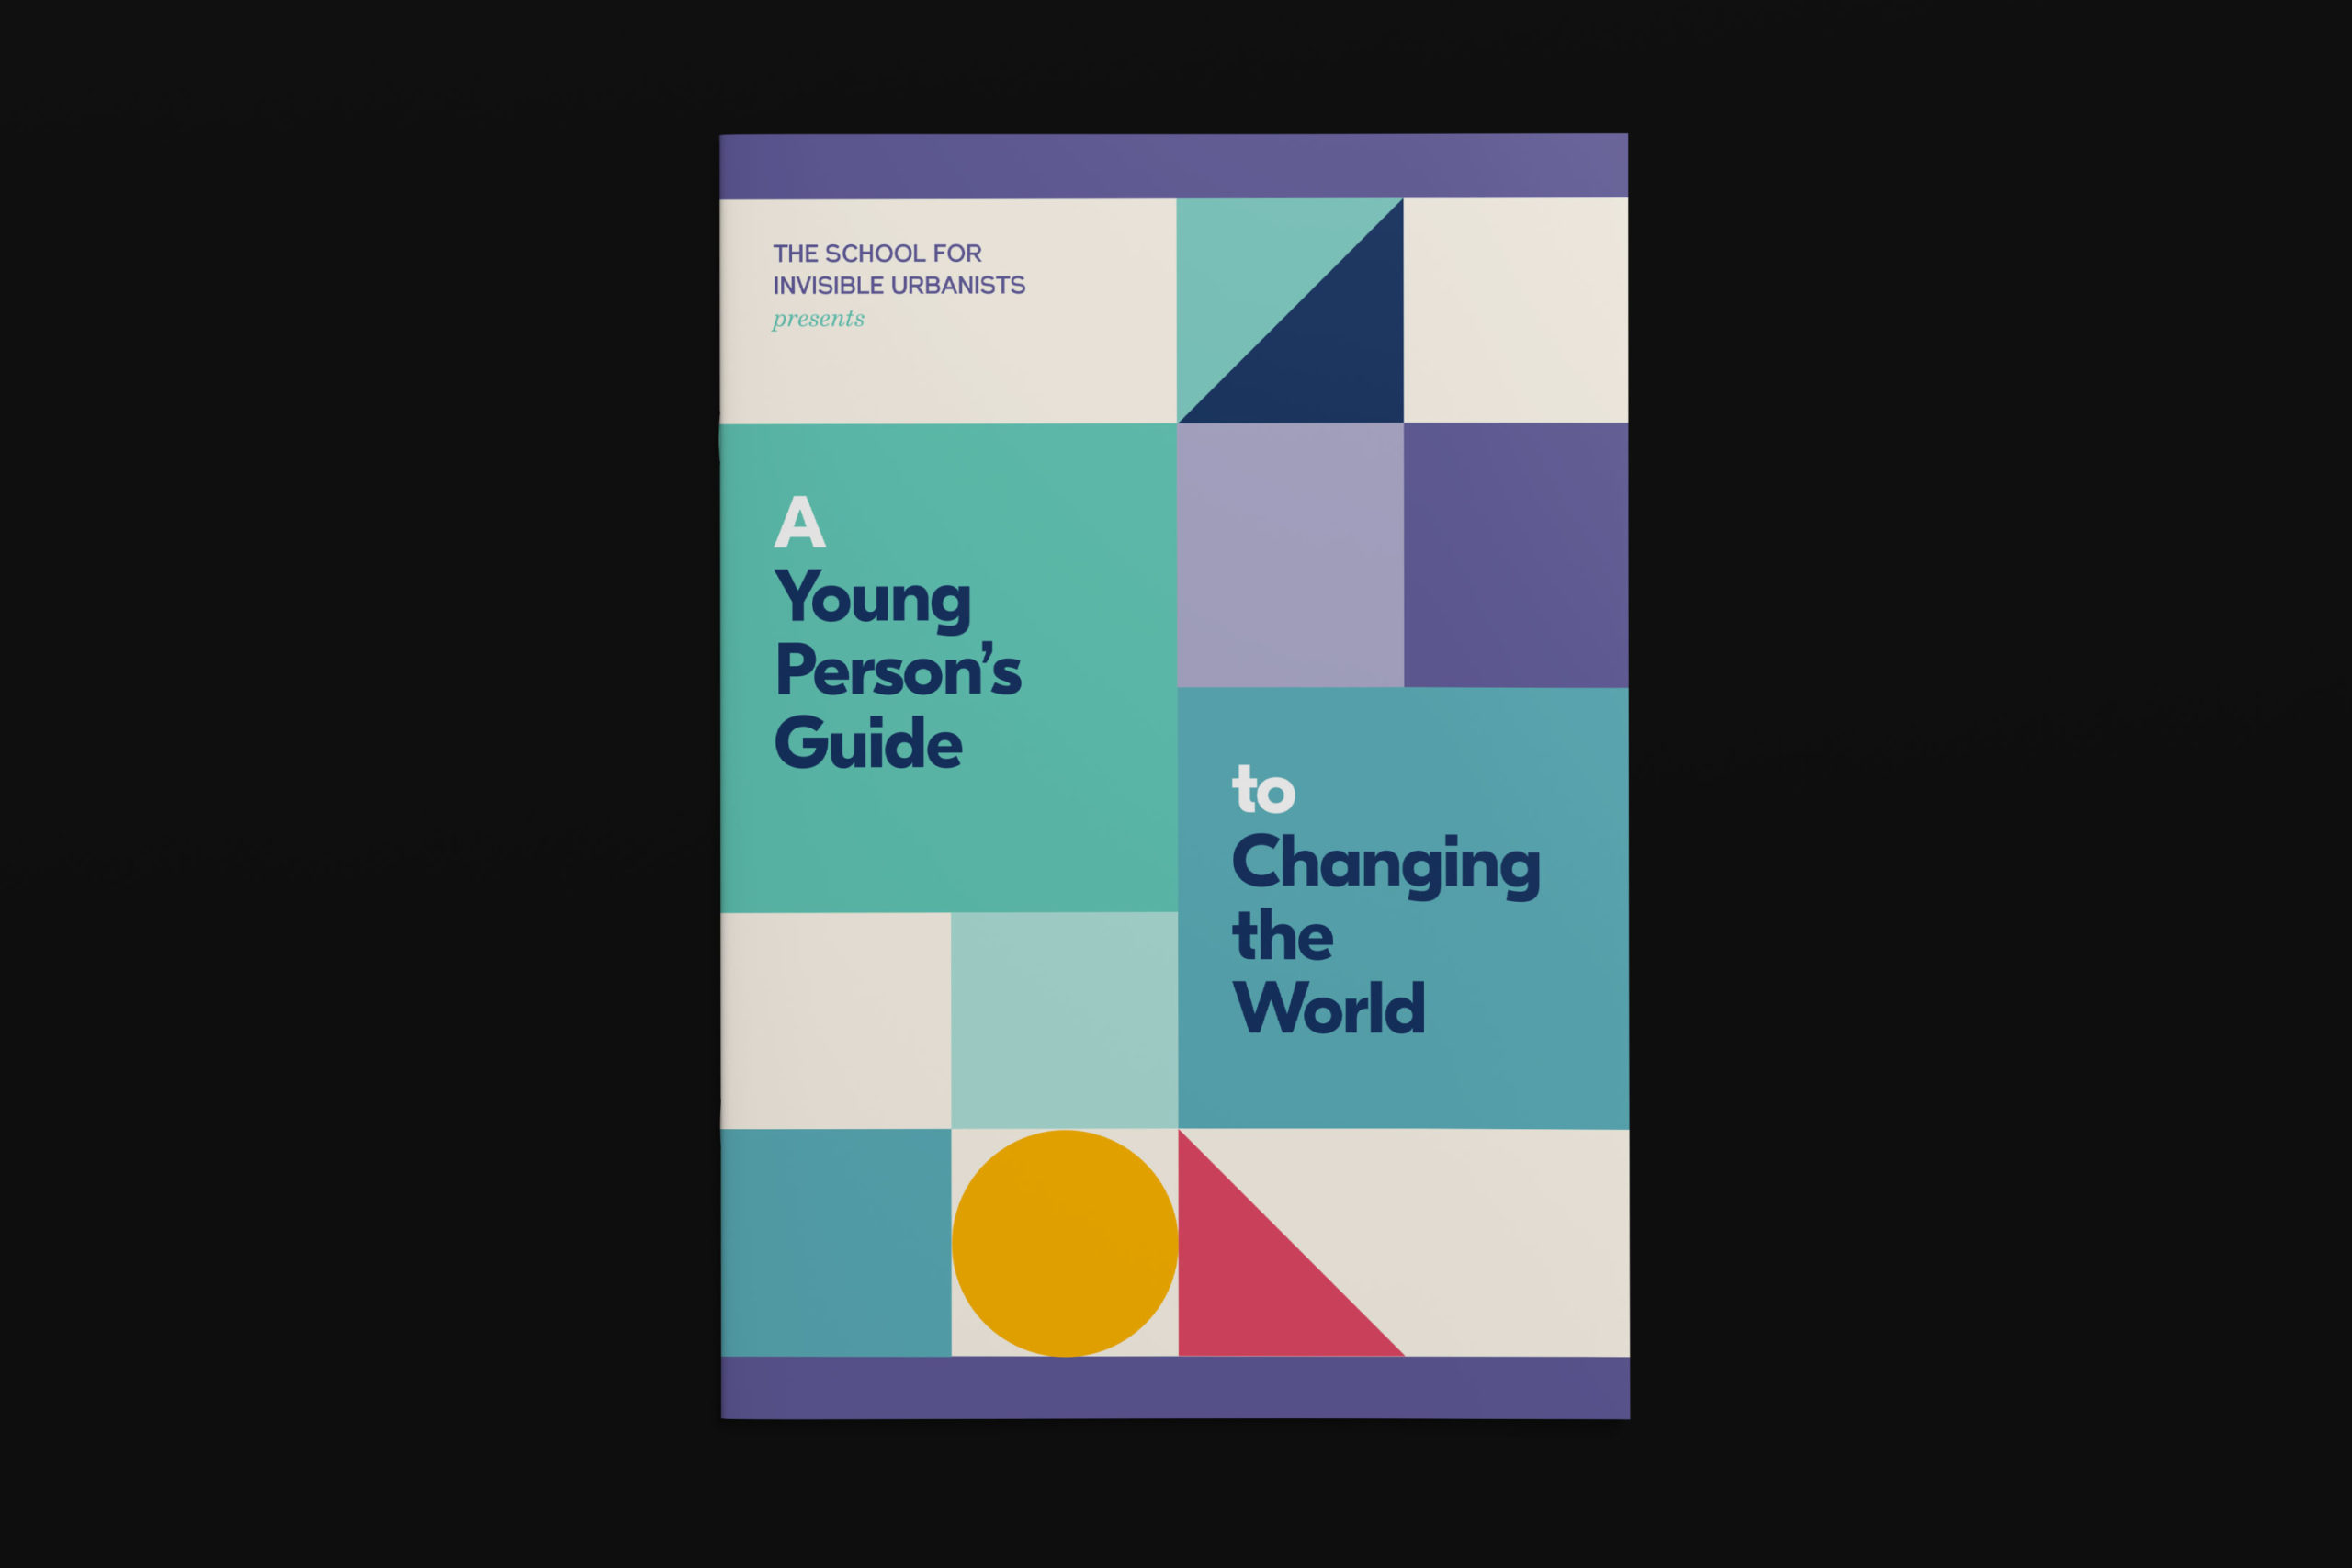 TSFIU_A-Young-Persons-Guide_Cover_wide